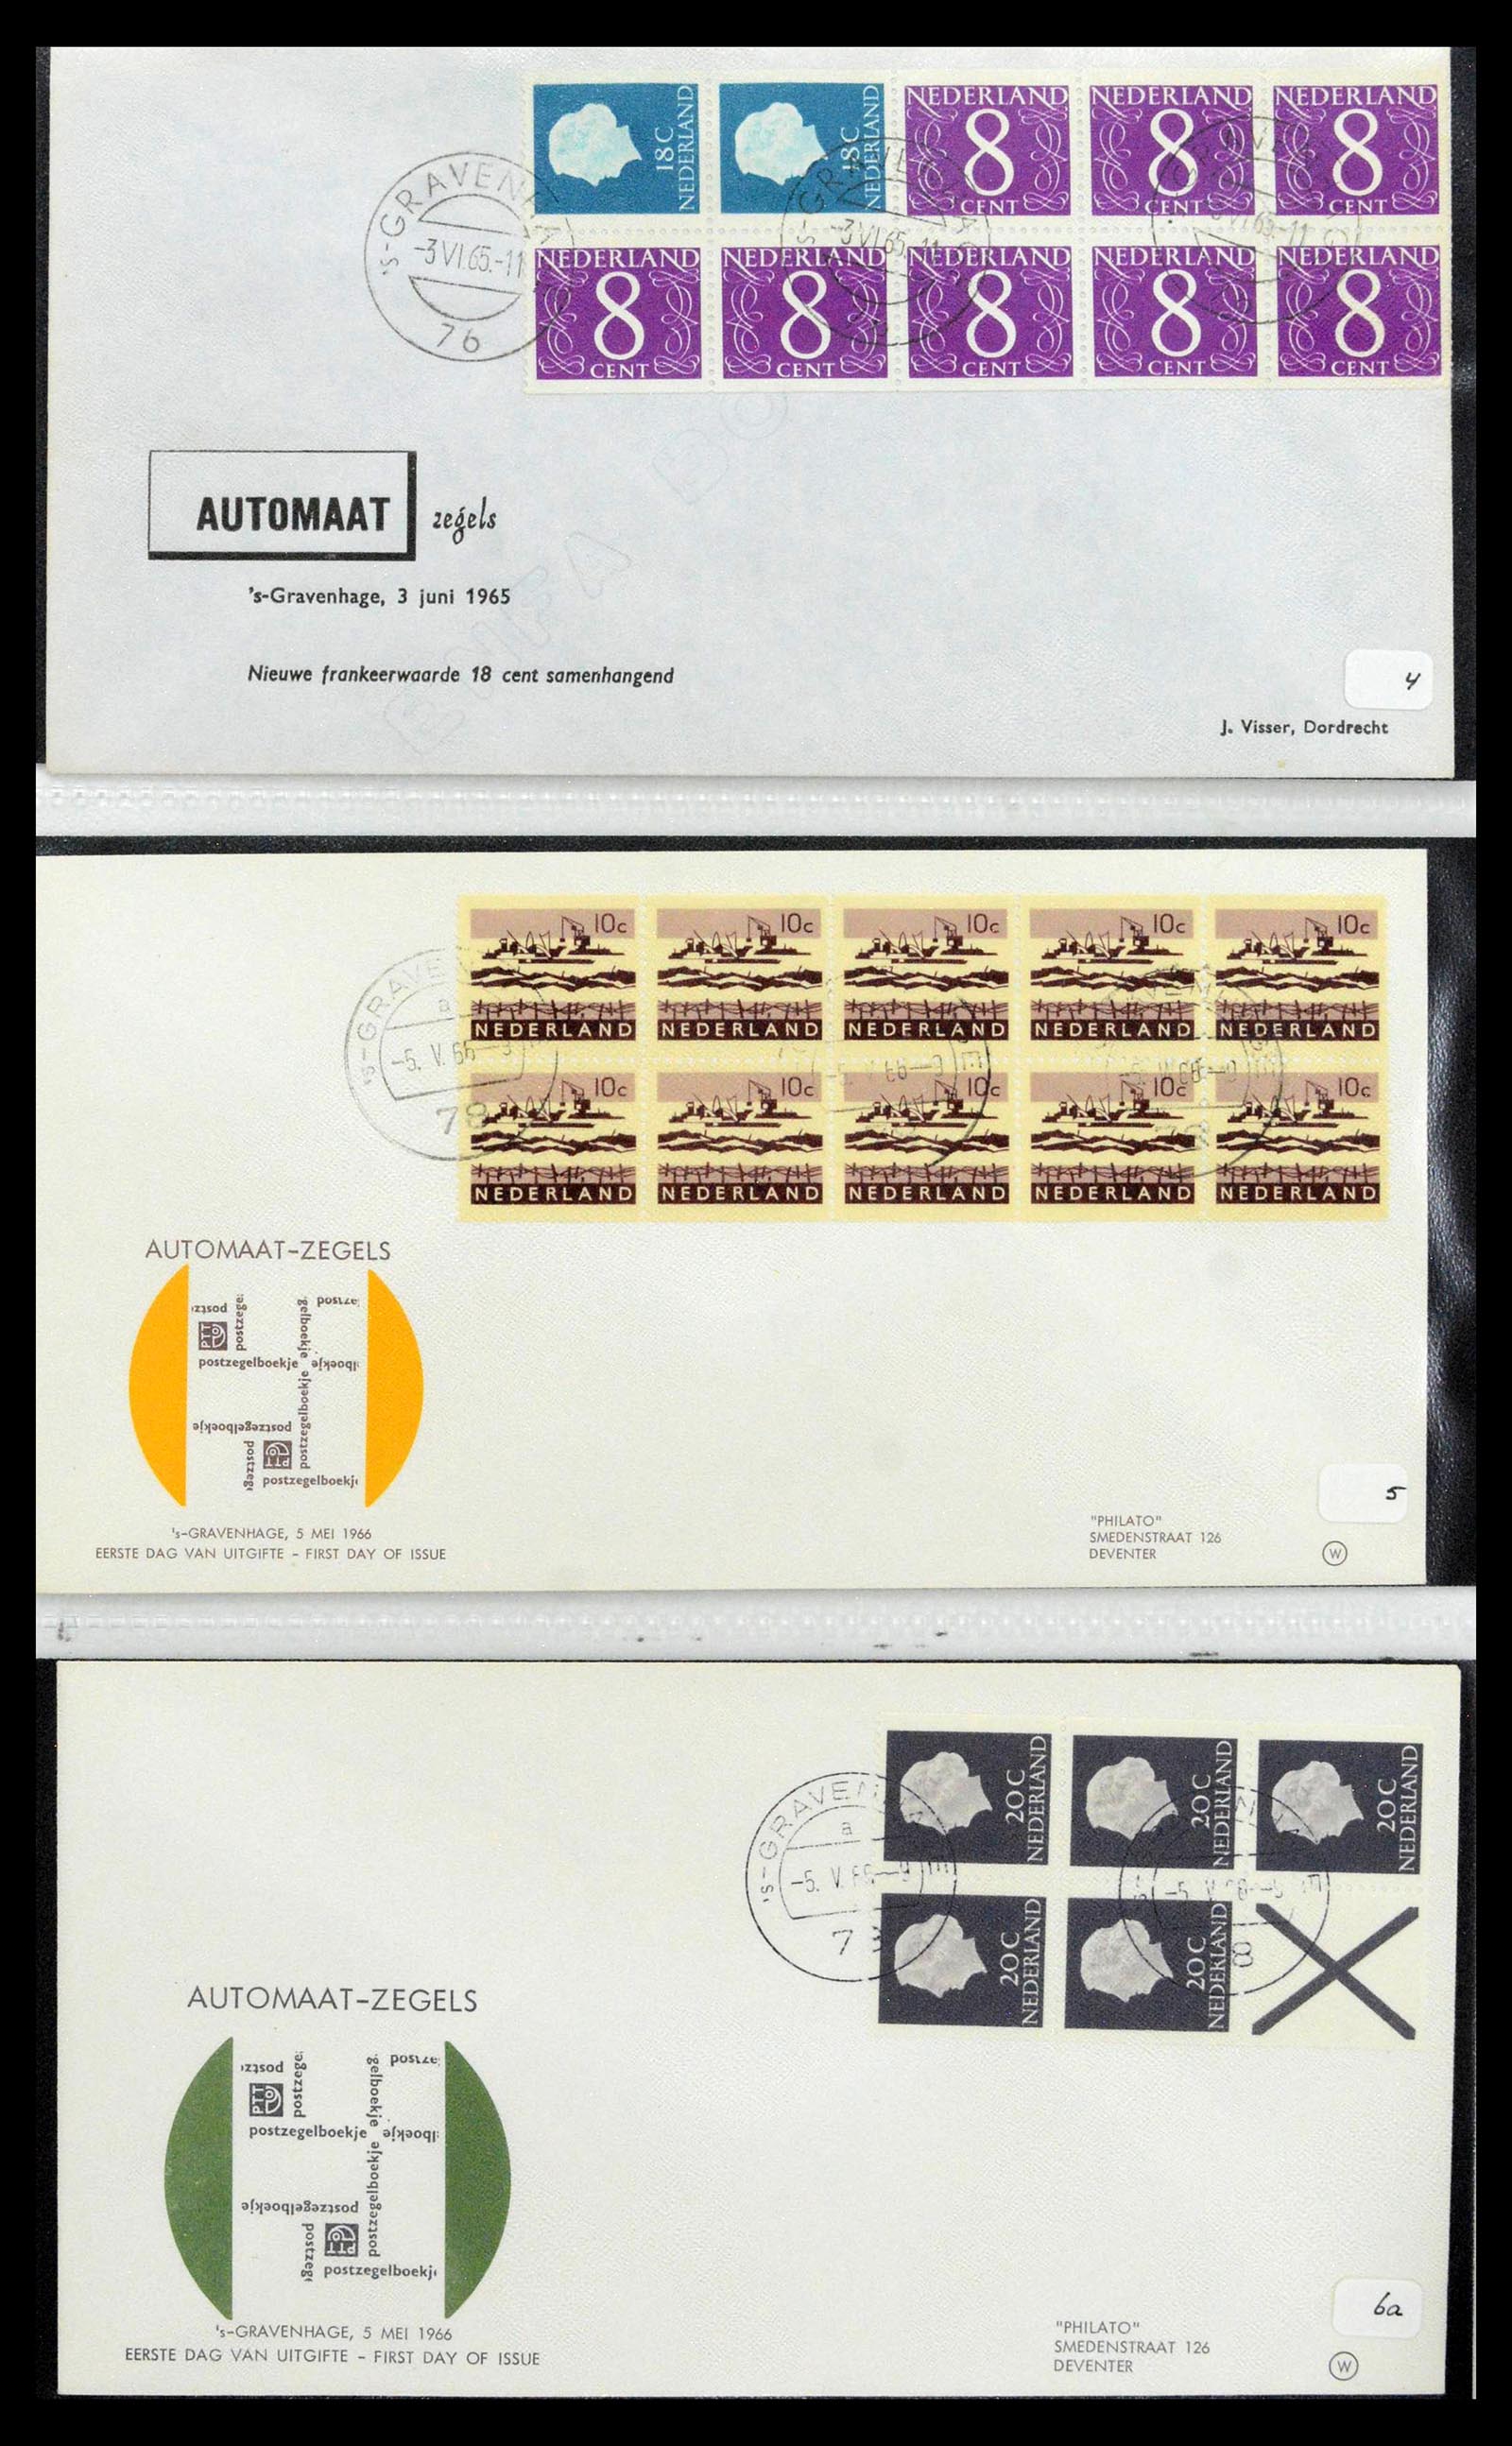 38559 0063 - Stamp collection 38559 Netherlands special first day covers.